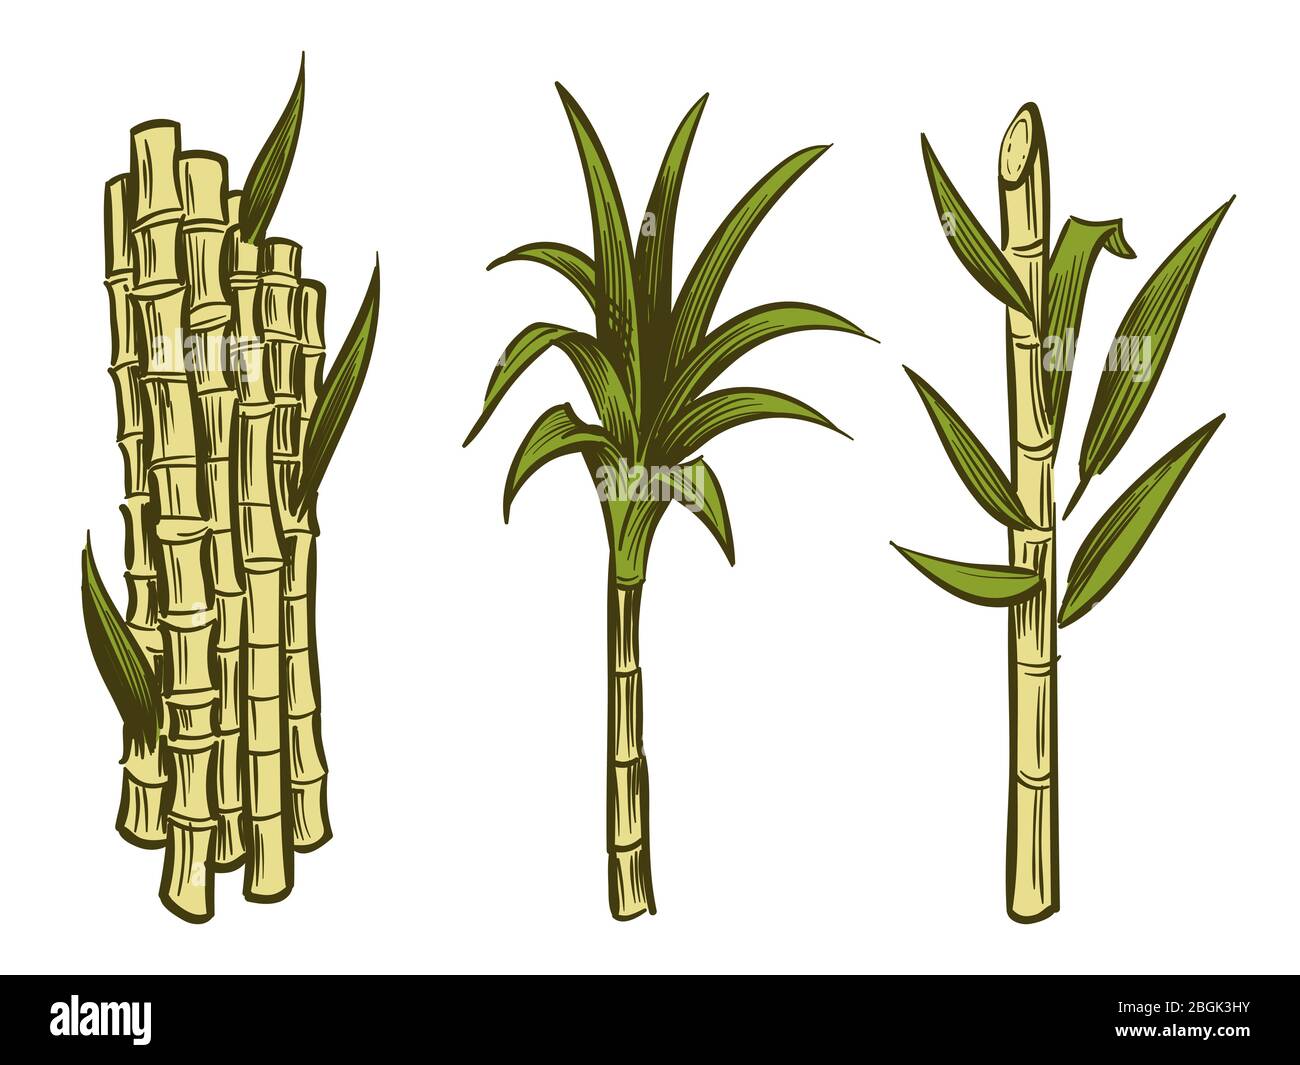 Sugar cane plants of collection isolated on white background. Vector illustration Stock Vector